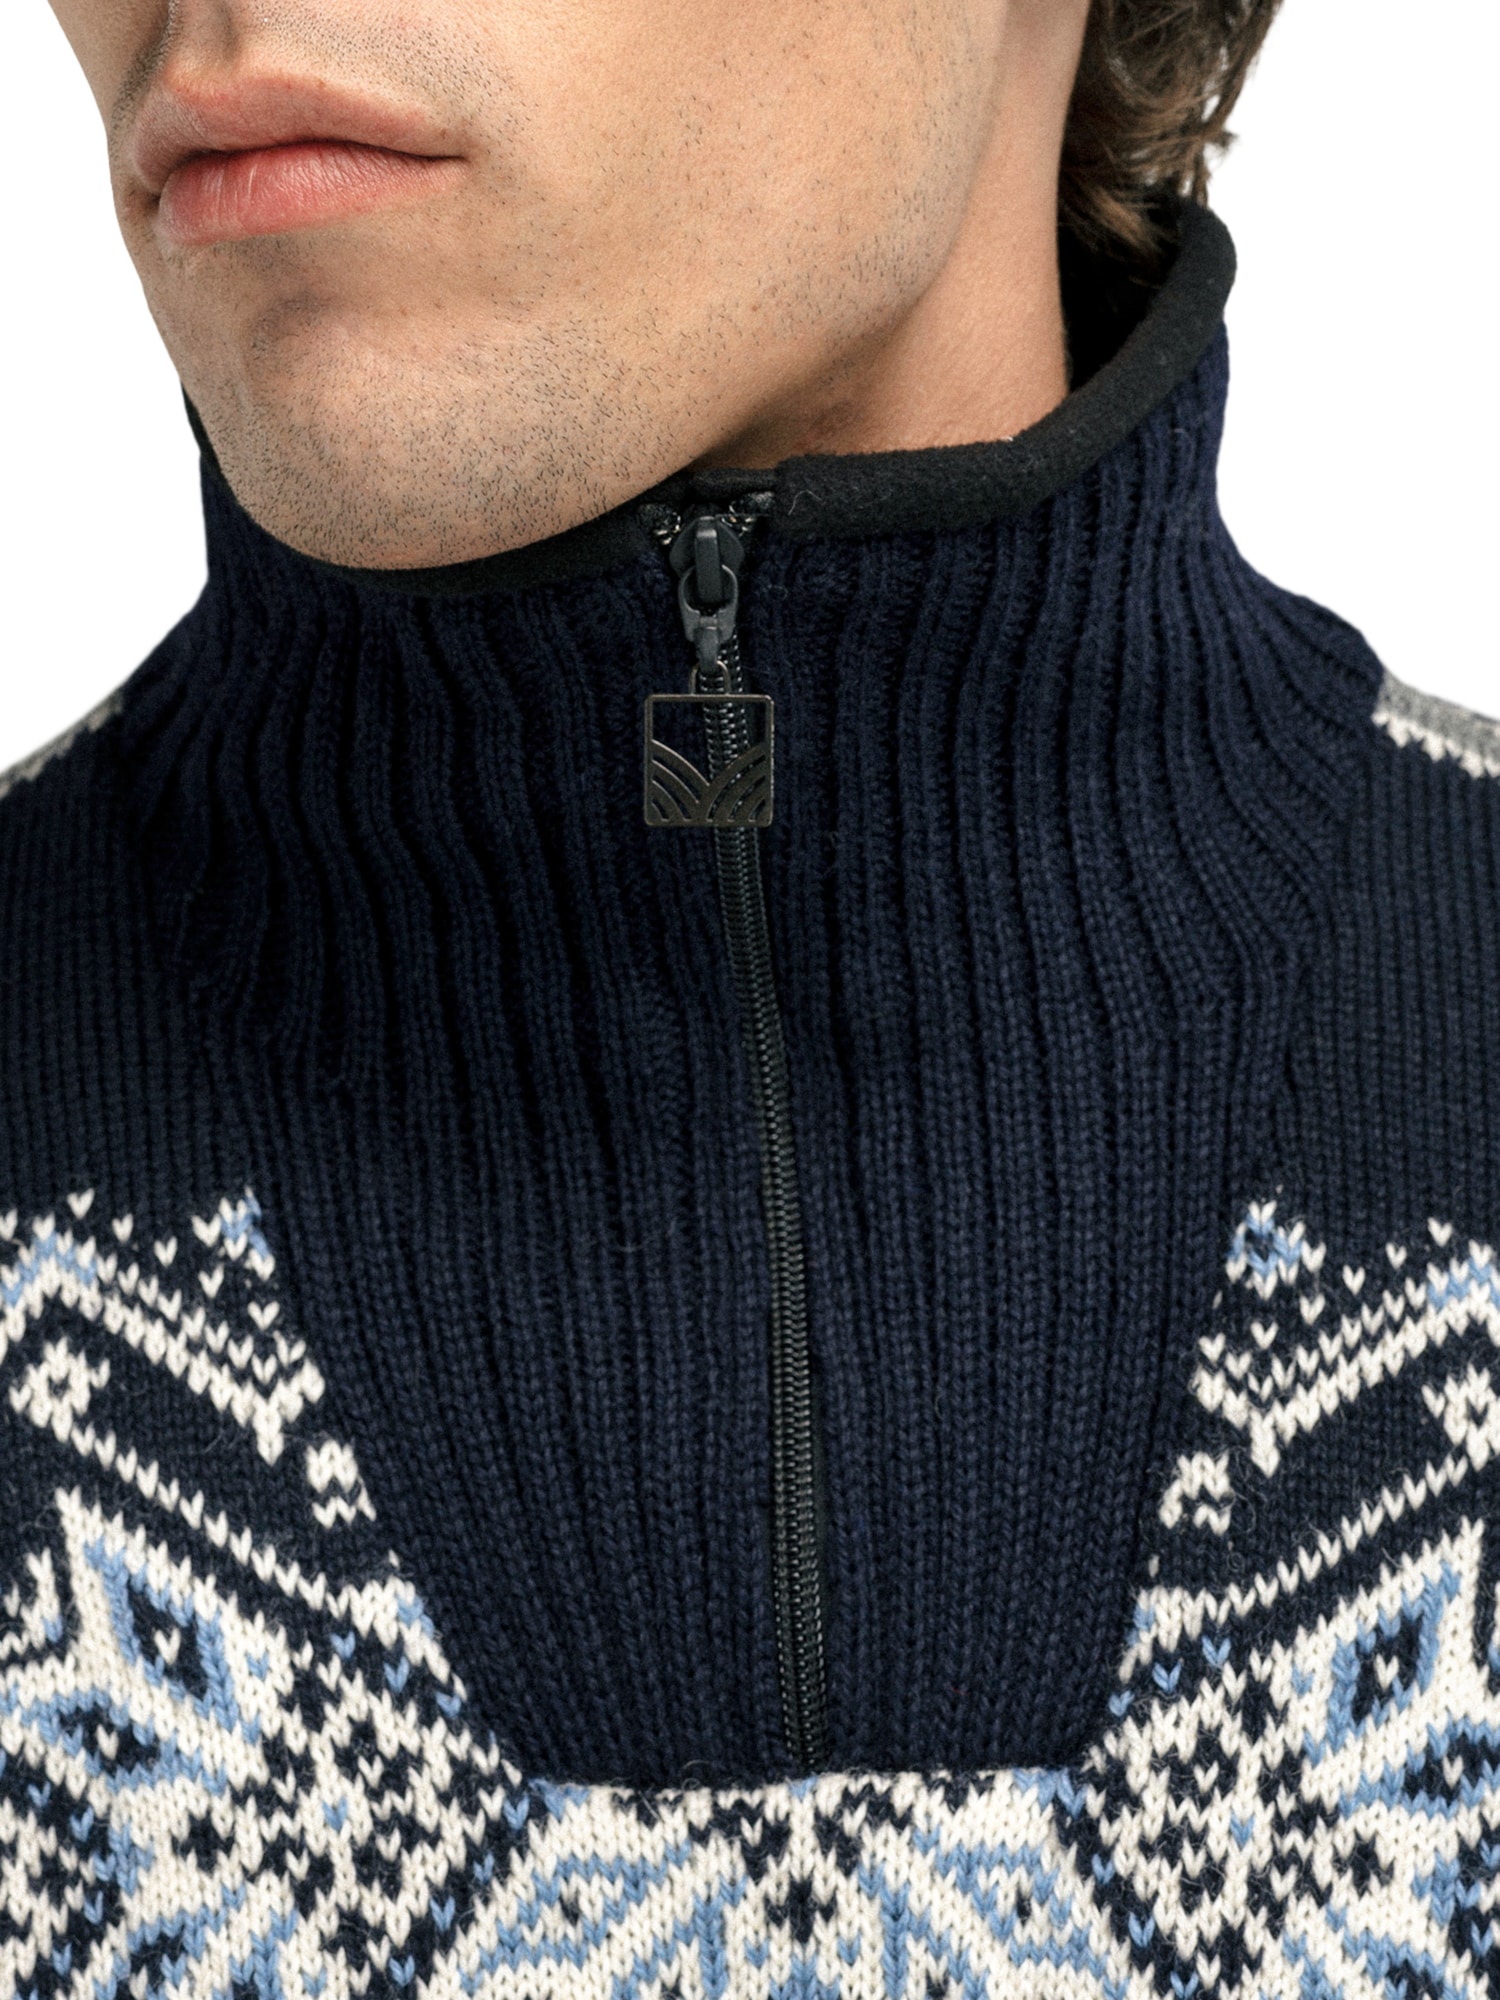 Vail Weatherproof Sweater - - Dale - Dale Norway of - Norway Offwhite of Men